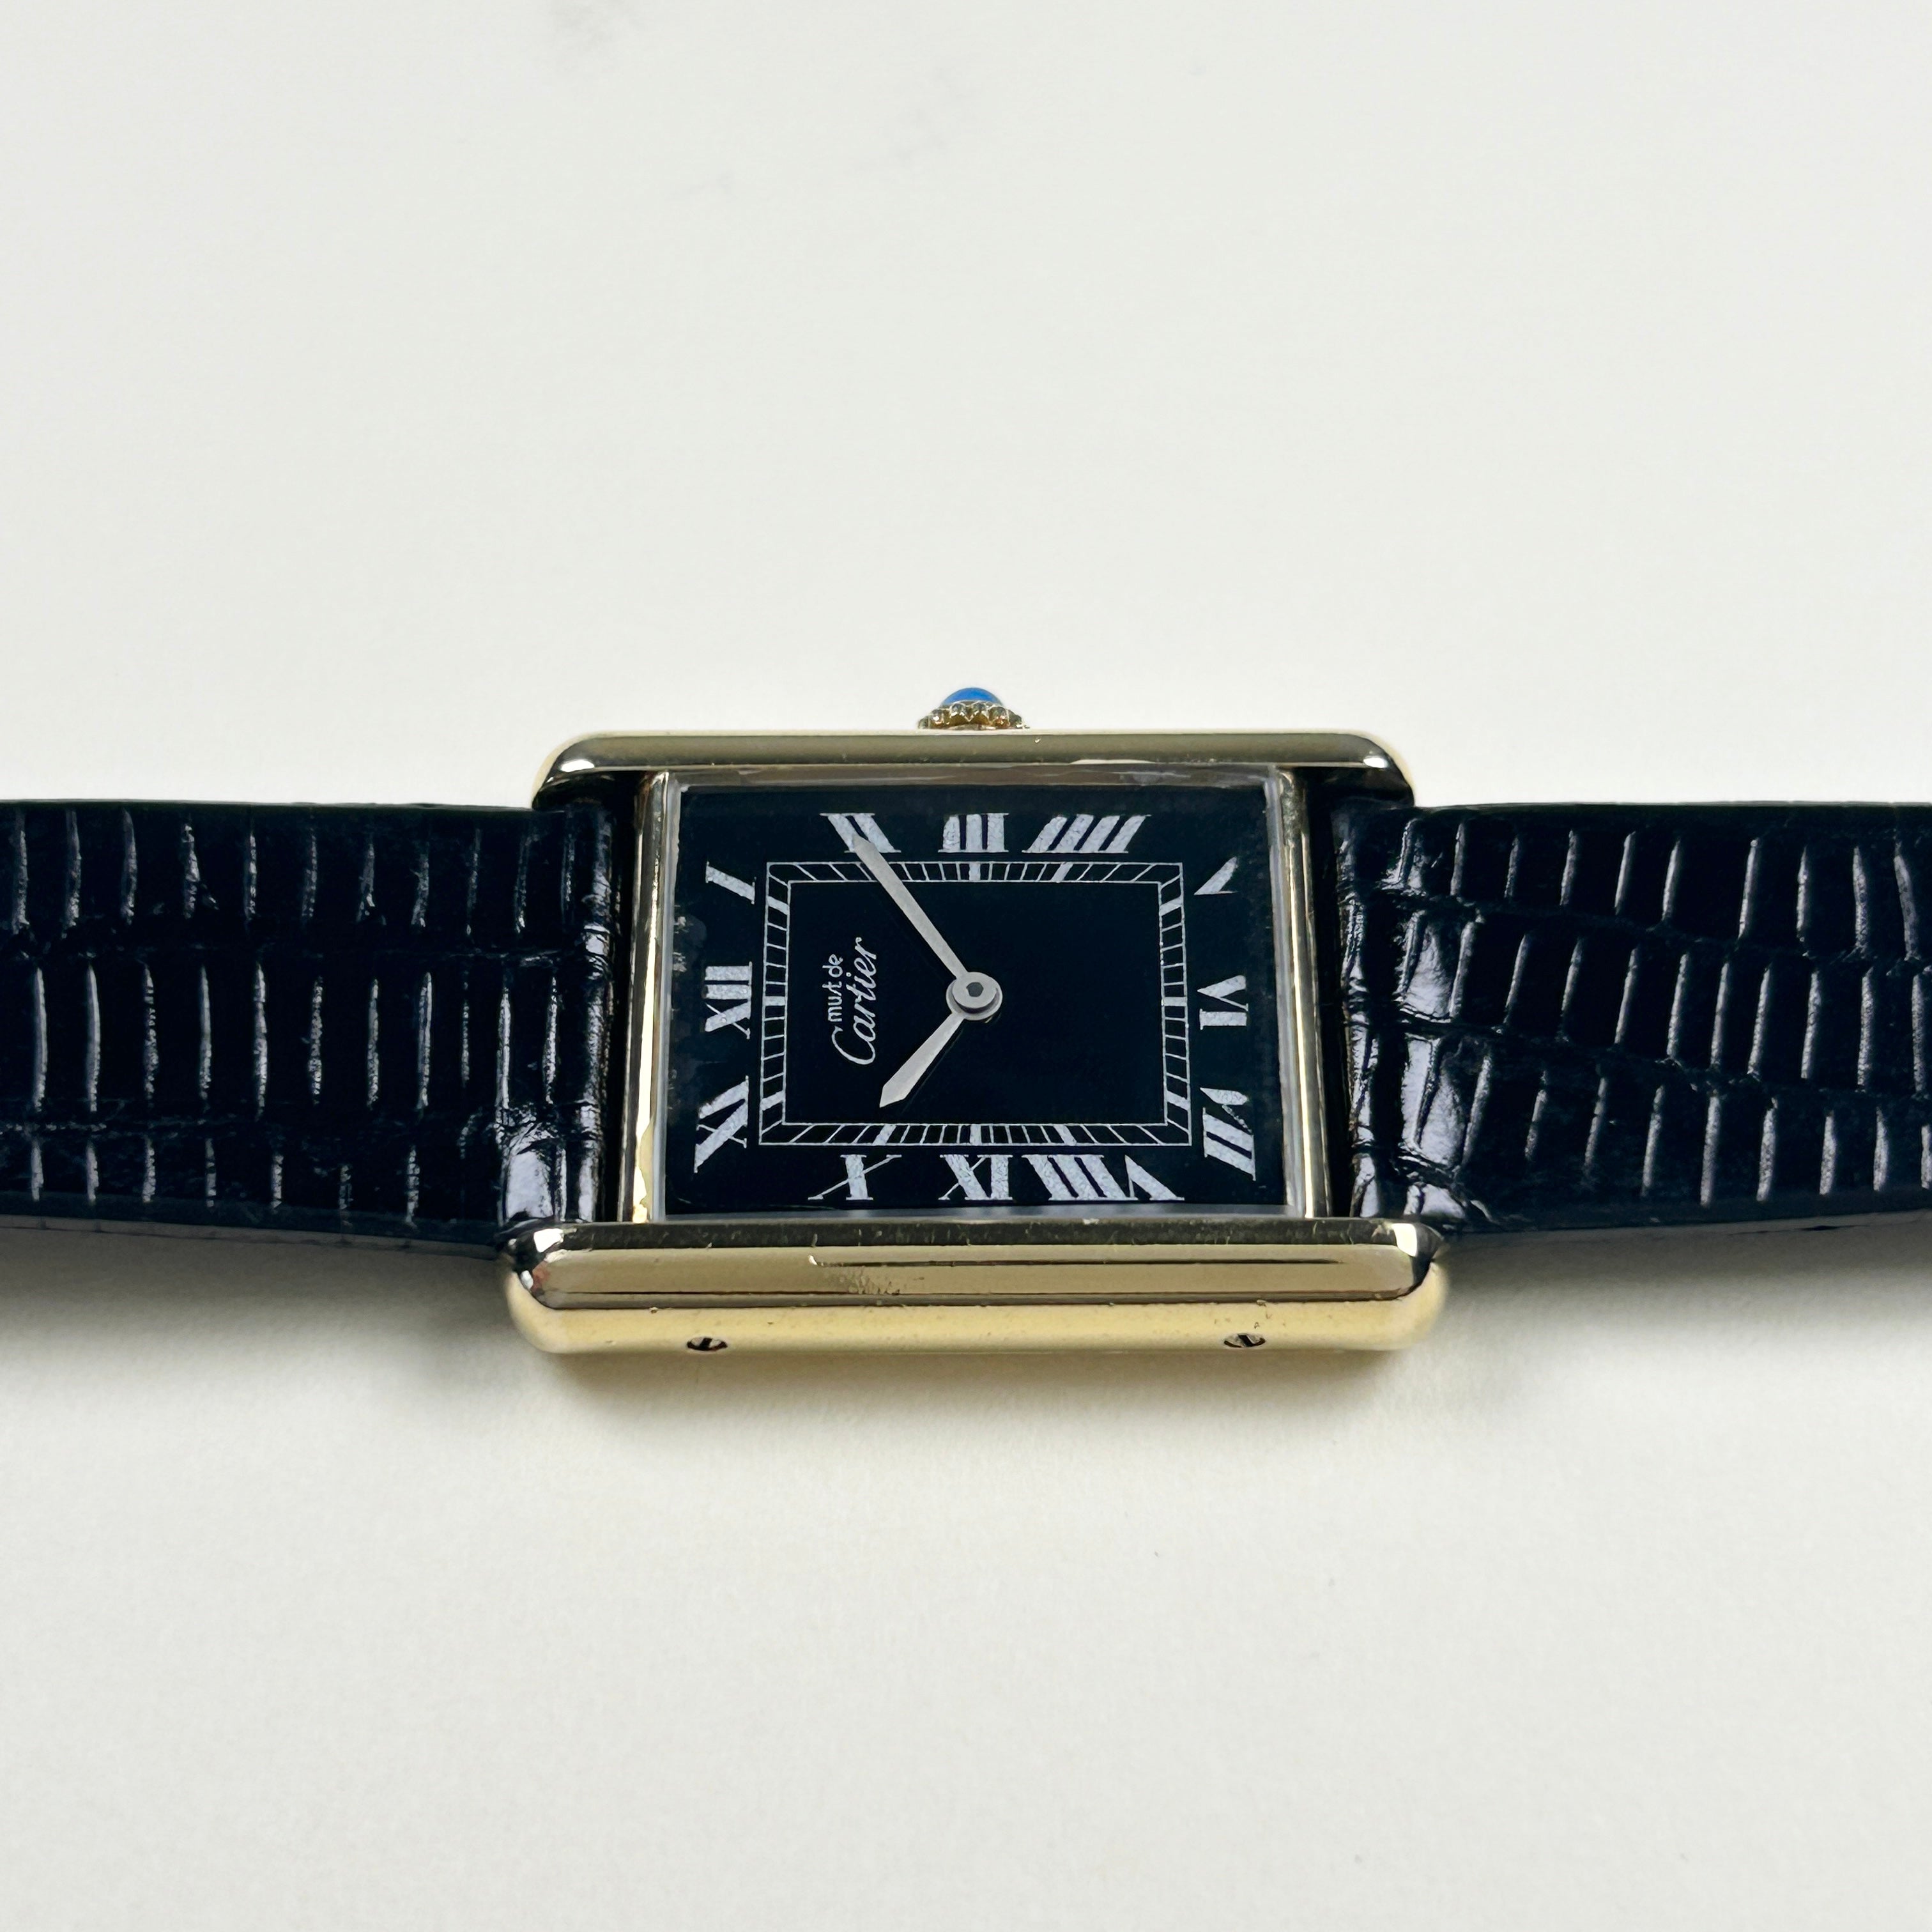 [Cartier] Must-have tank LM manual winding black Roman